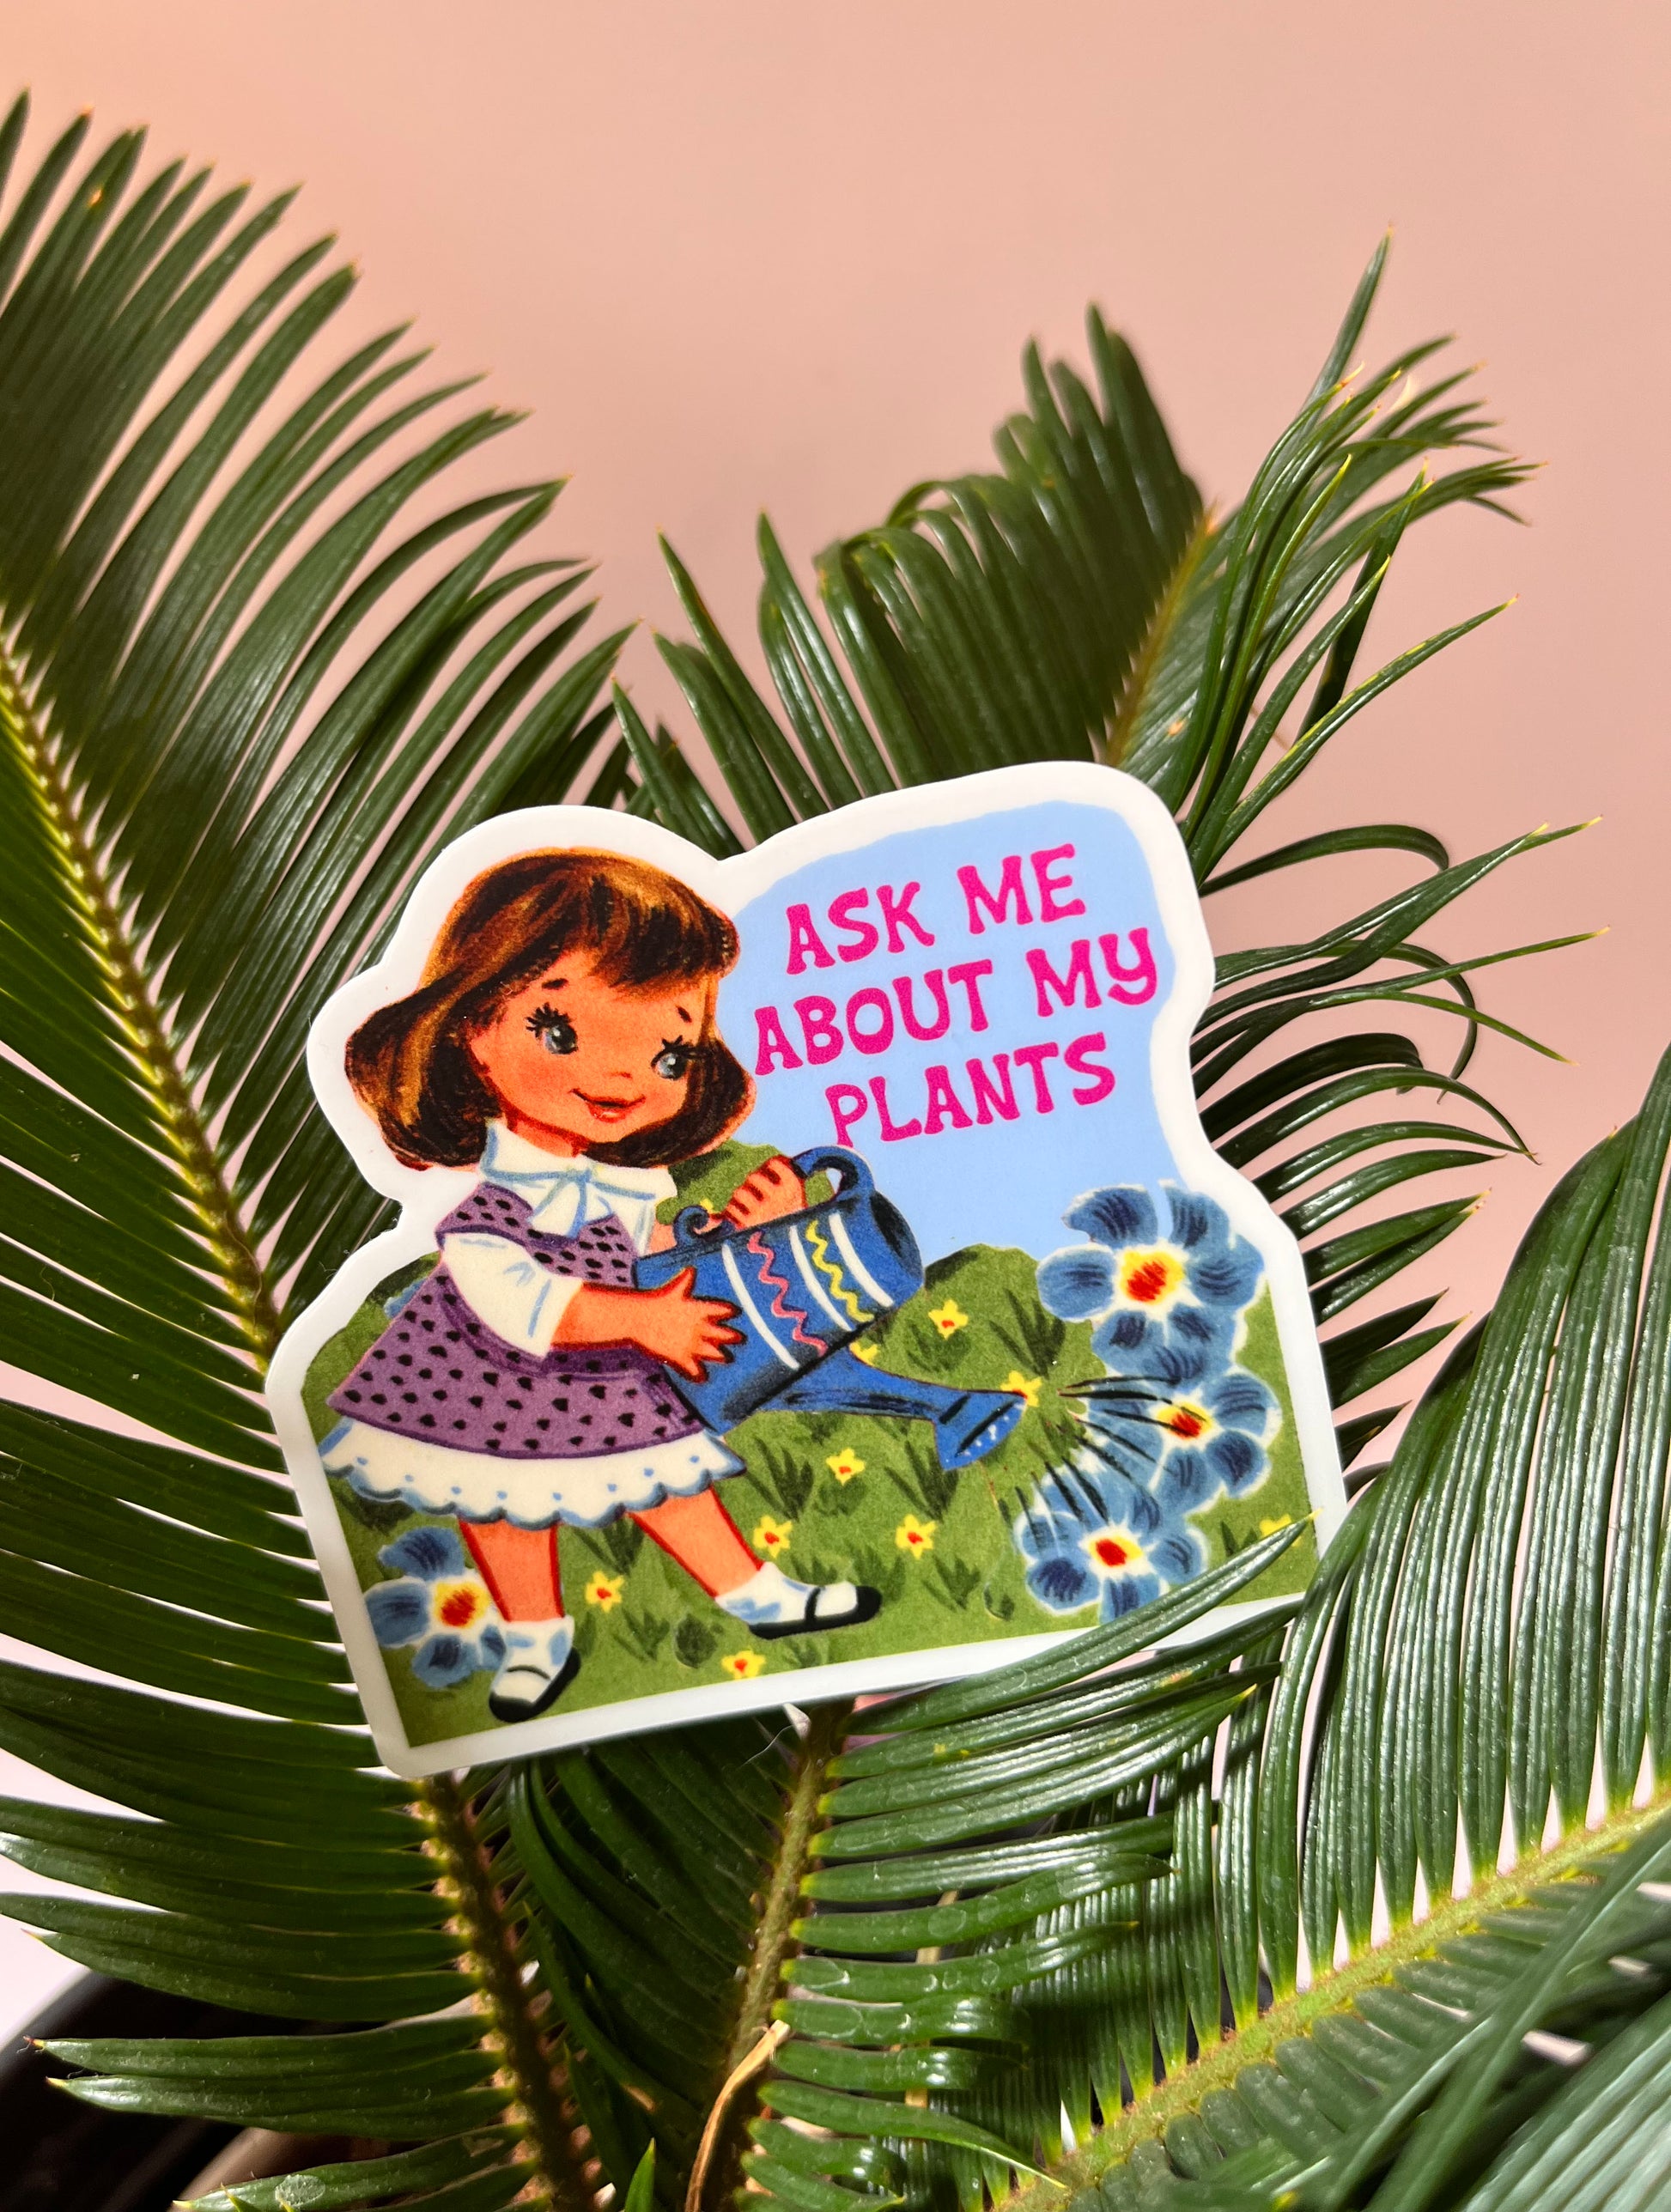 funny ask me about my plants sticker cute decal with vintage style girl watering flowers garden fun stickers for water bottle laptop coin laundry montana funny stickers stocking stuffer gift for plant lover plant lady secret santa 